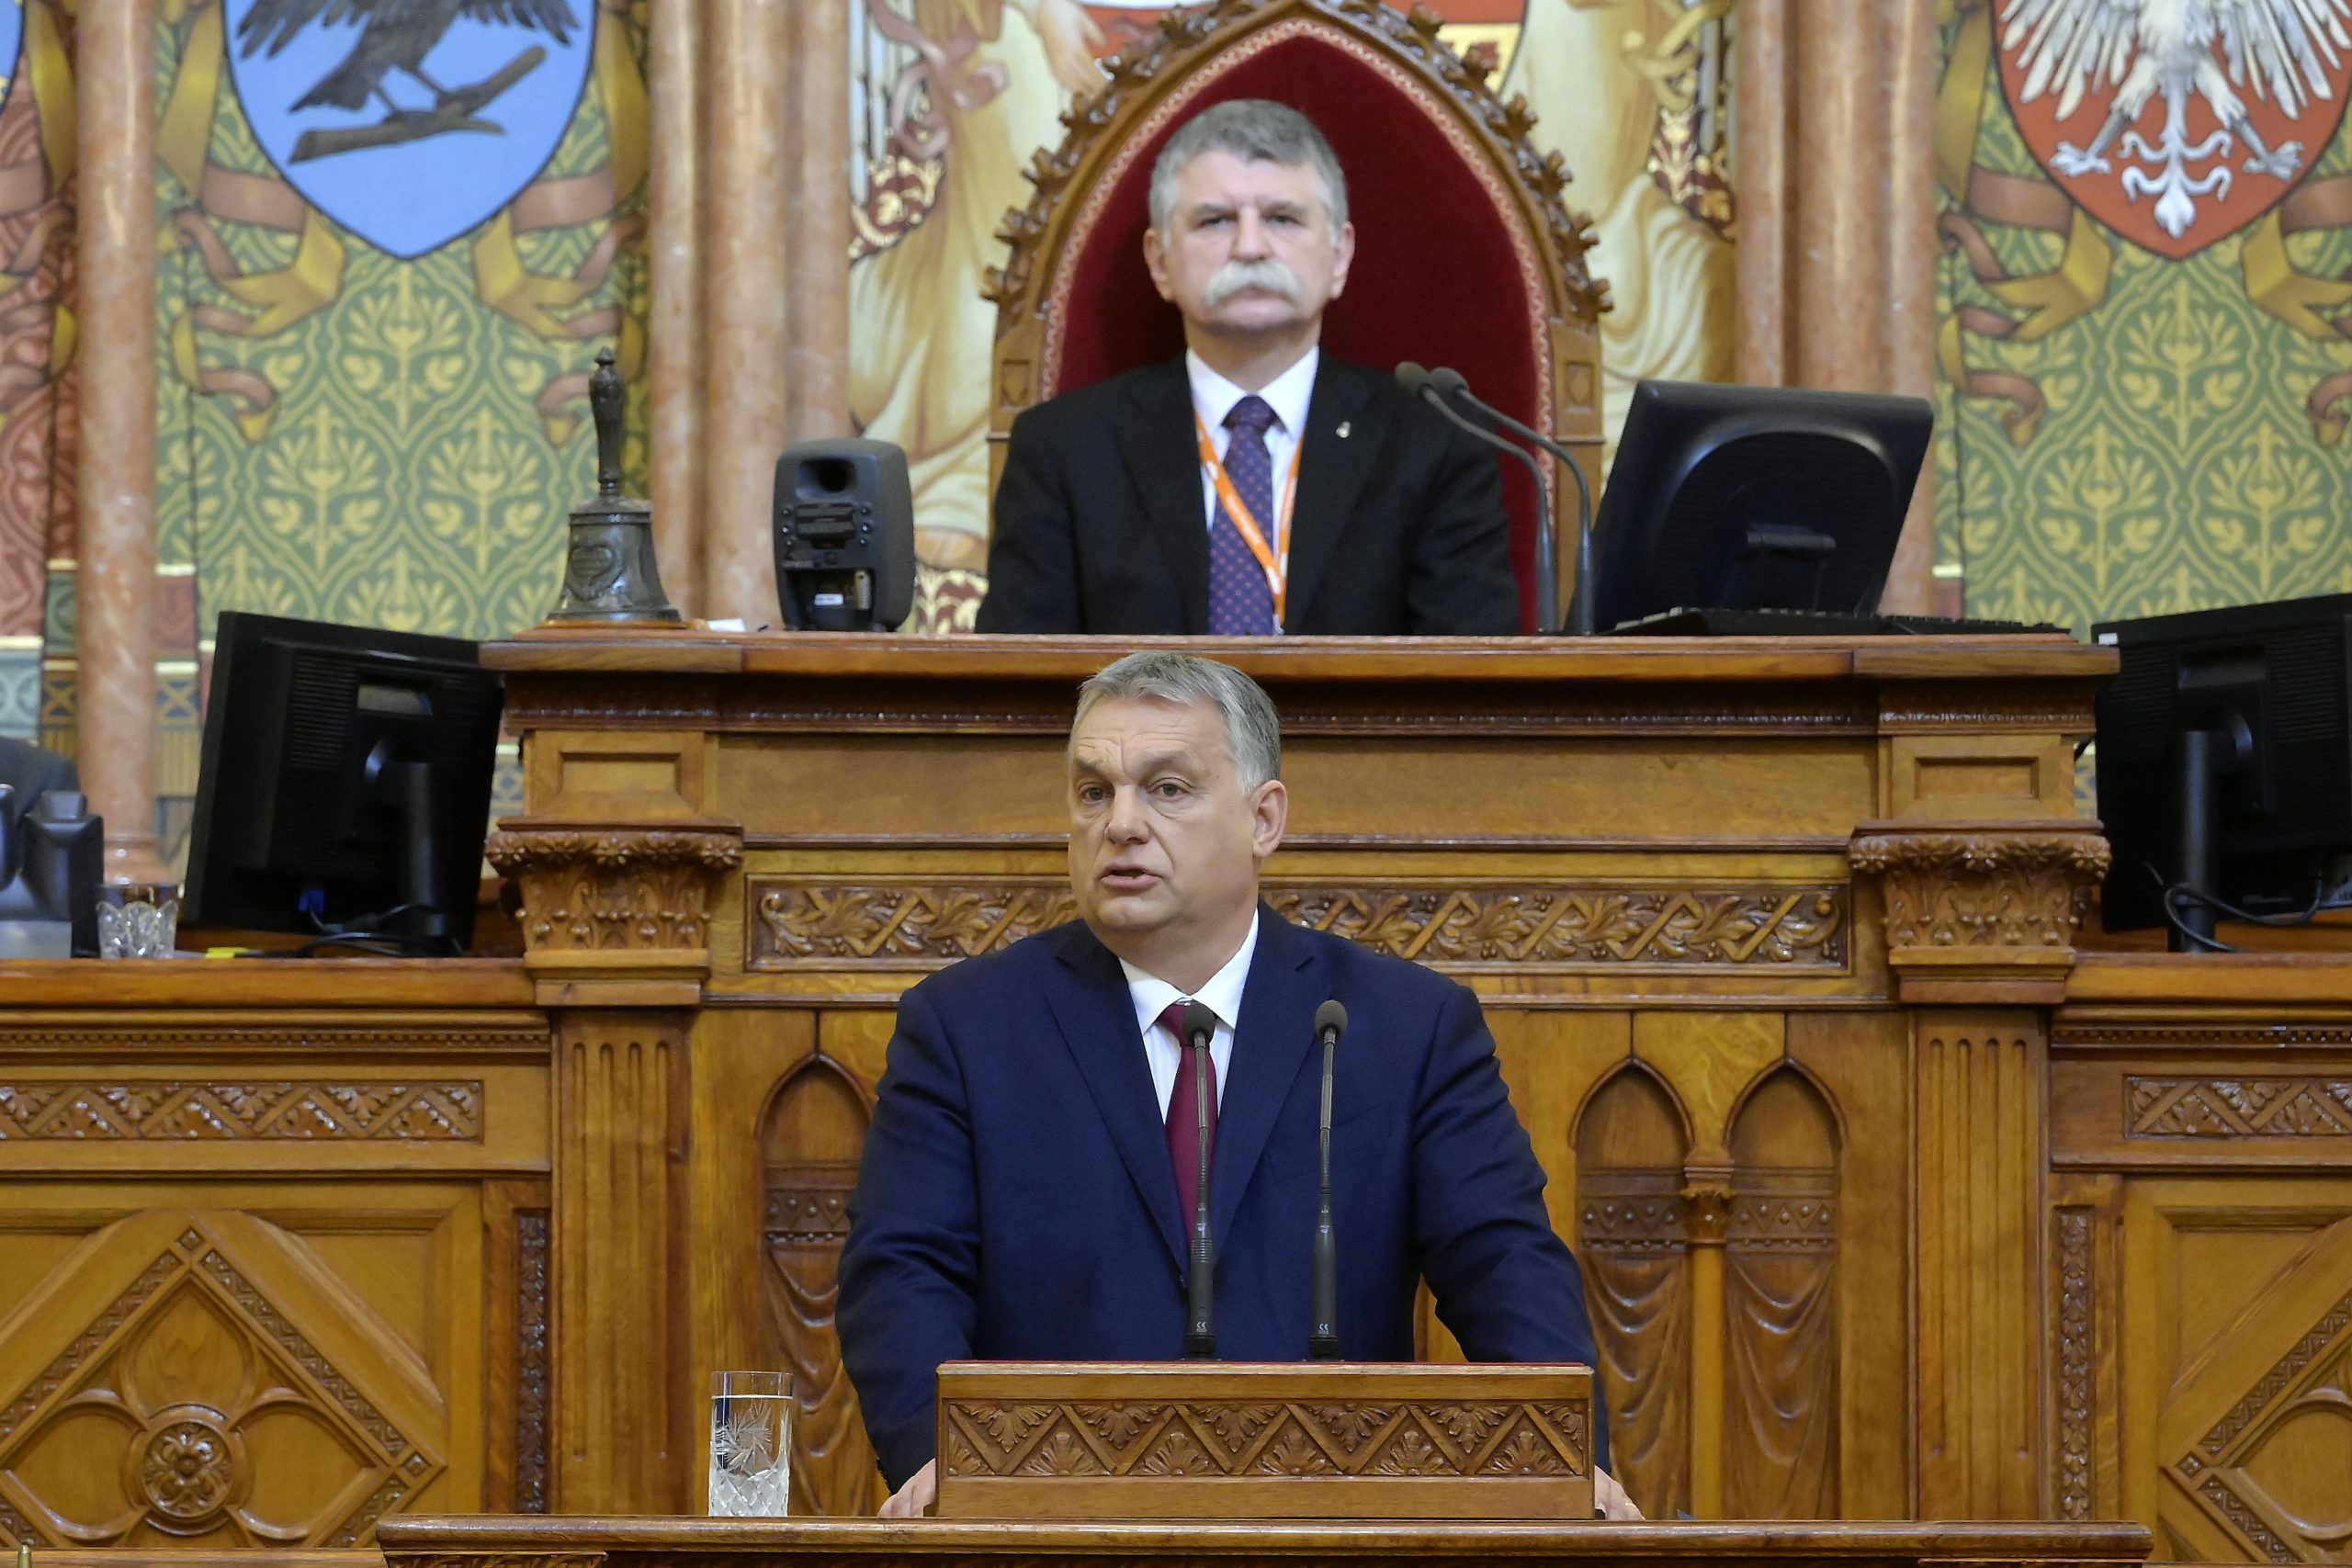 Economic Sectors Get Priority in Fifth Orbán Government